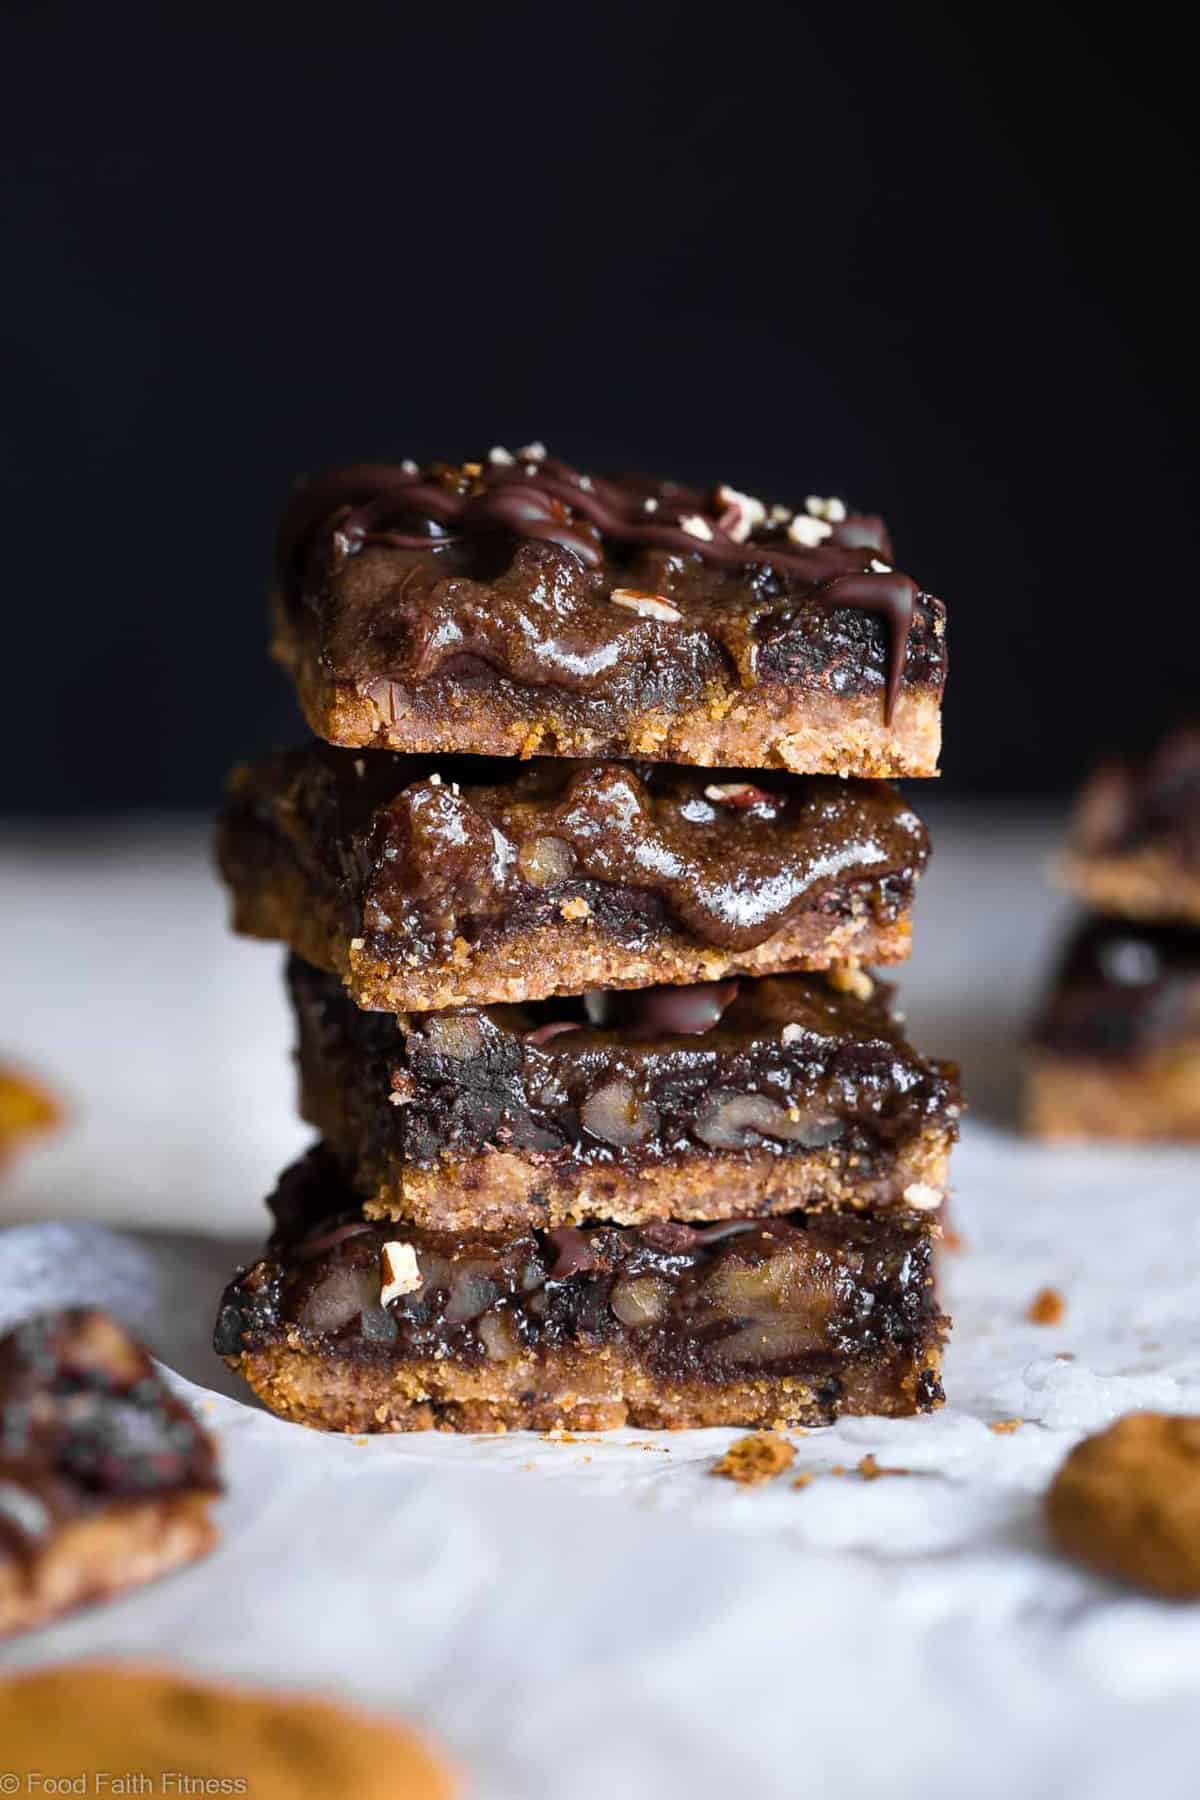 Gingersnap Chocolate Paleo Magic Cookie bars - These OOEY GOOEY, gluten free and vegan magic bars have spicy-sweet, cozy festive flavor and are SO easy to make! Perfect for a healthy, dairy free holiday treat! | #Foodfaithfitness | #Glutenfree #Vegan #Paleo #Dairyfree #Eggfree